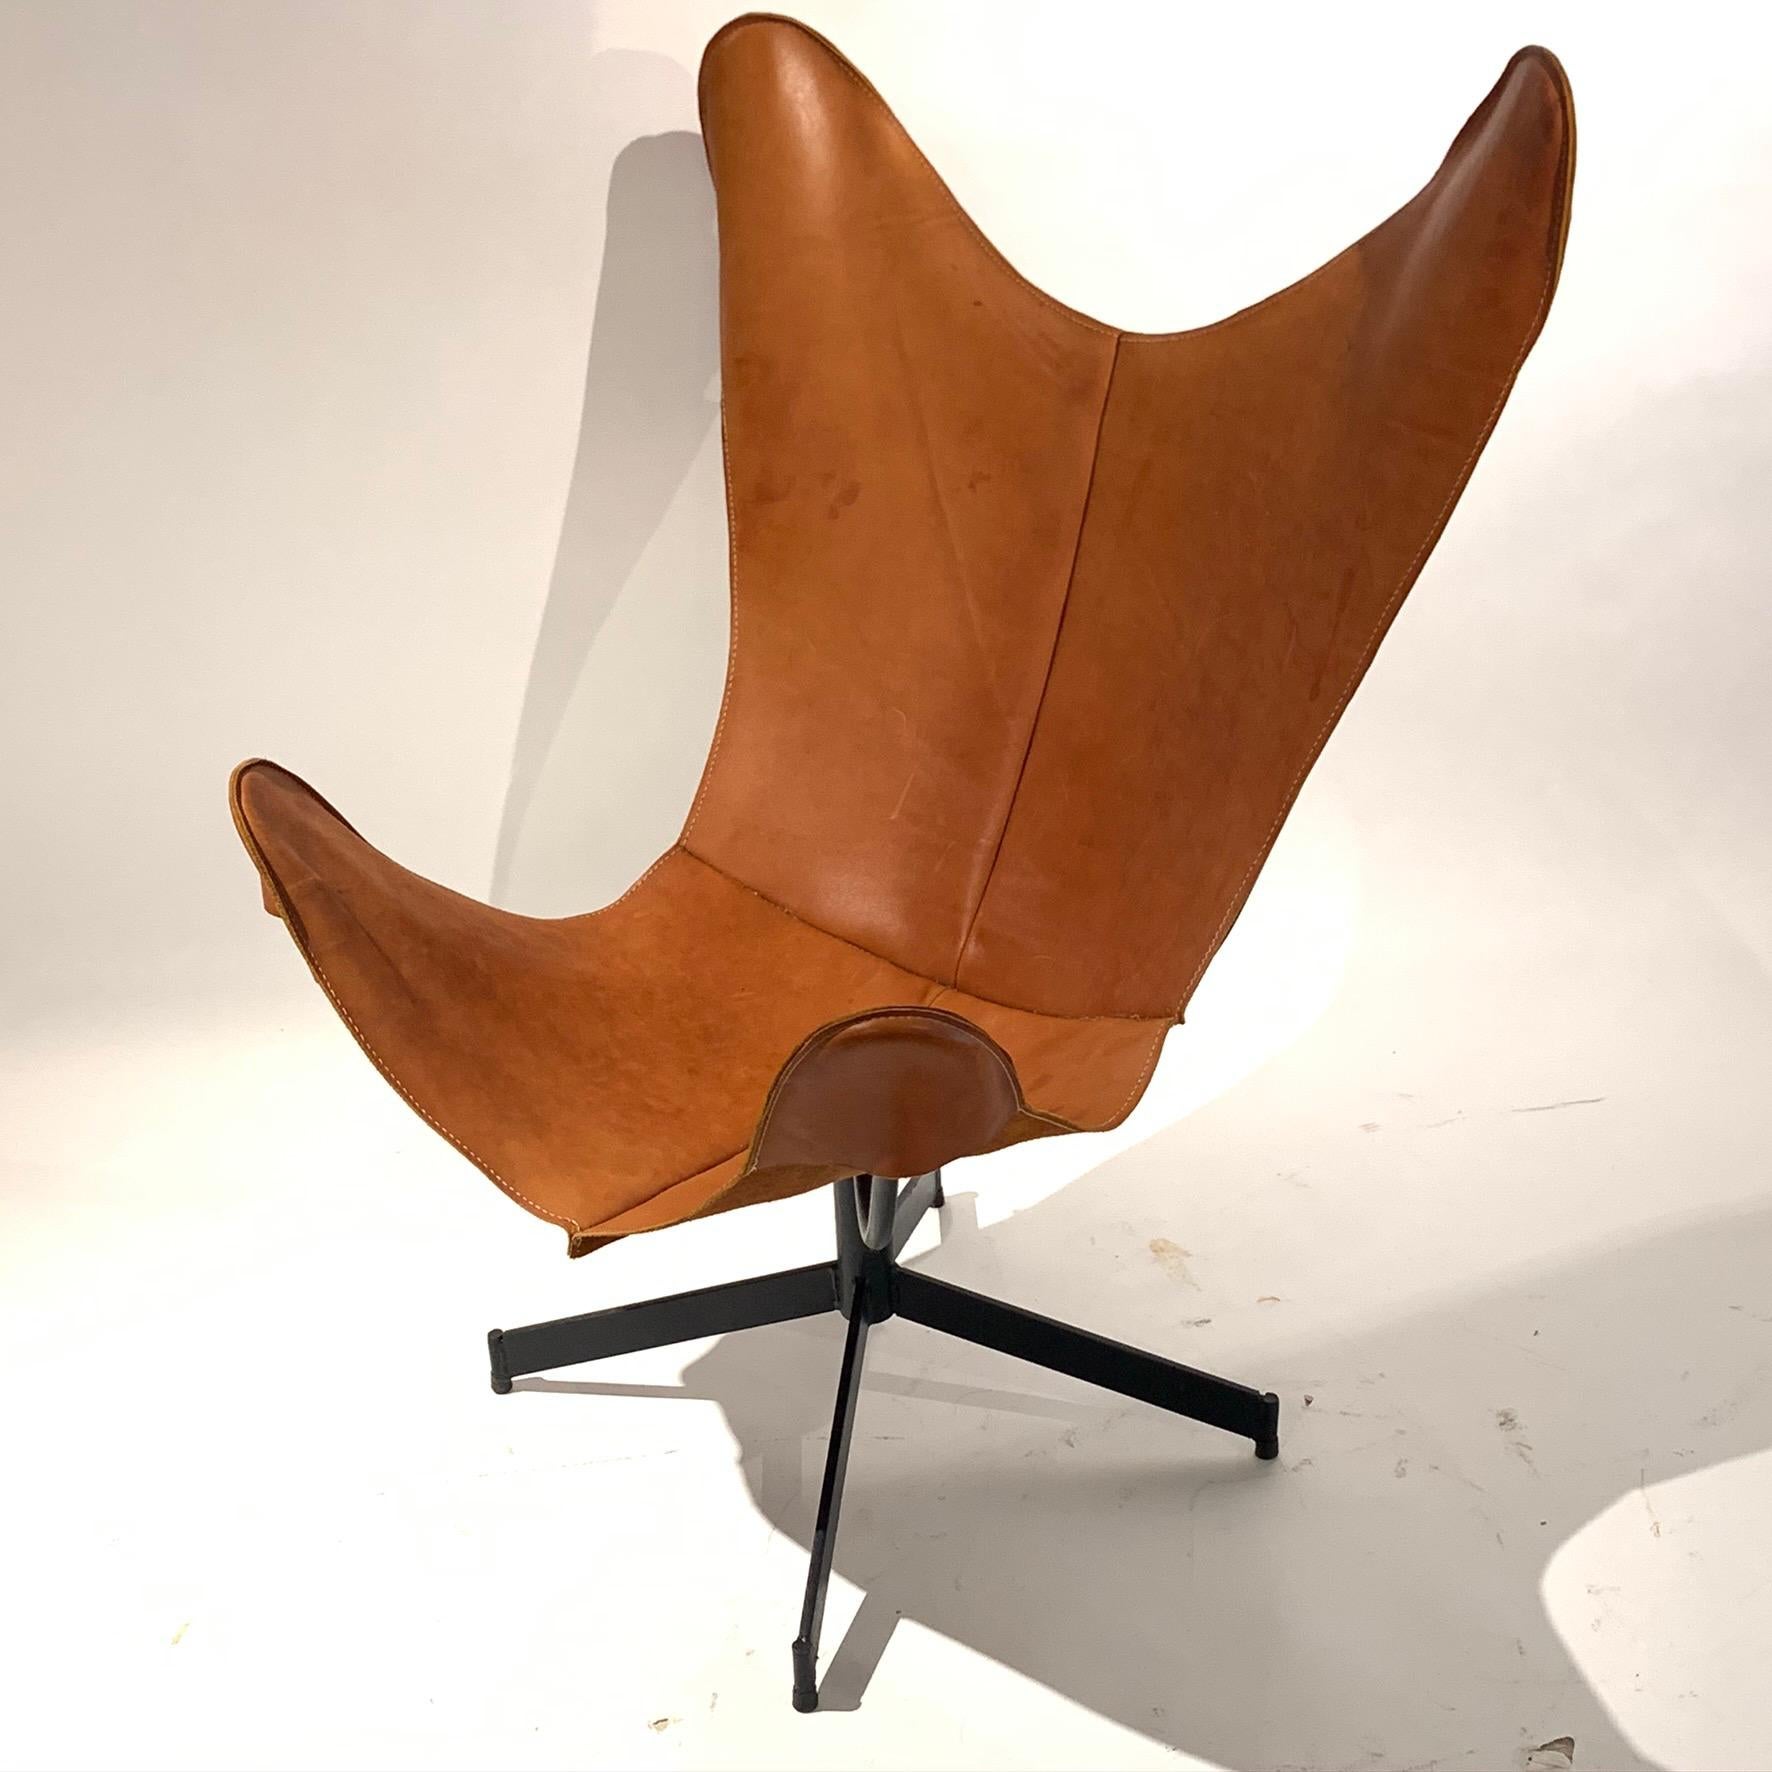 Rare 1960s wrought iron and heavy luggage tan leather hide sling chair designed by William Katavolous and made by Leathercraft. A great modern design that is very comfortable.